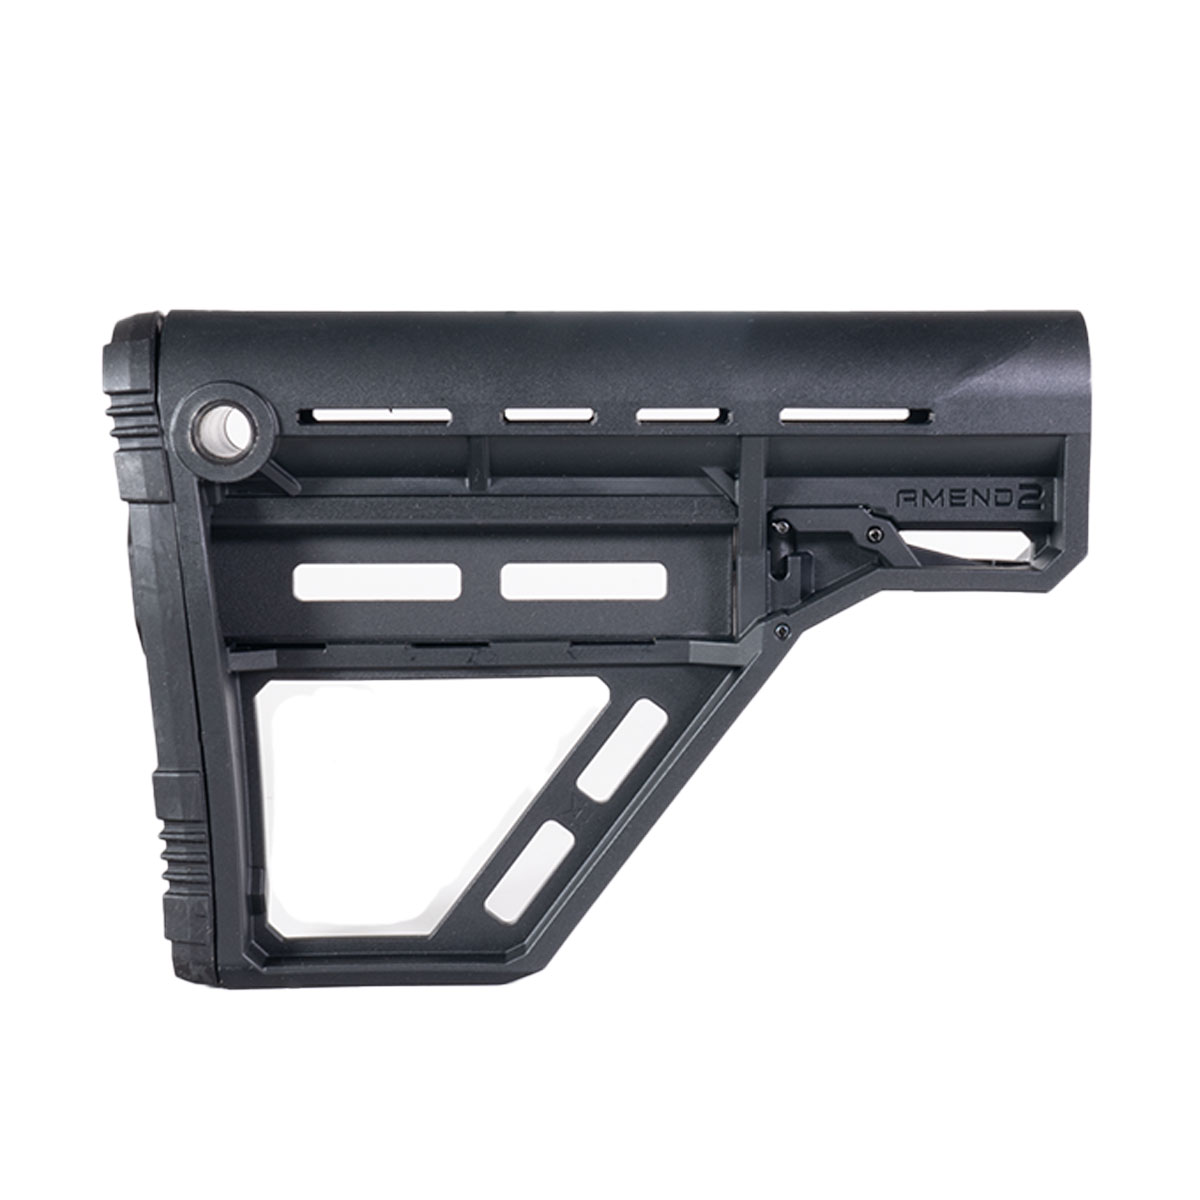 Amend2 Modular Stock - AMS - M-LOK Model QD Point Sling Coating Not Up To Amend 2's Standard